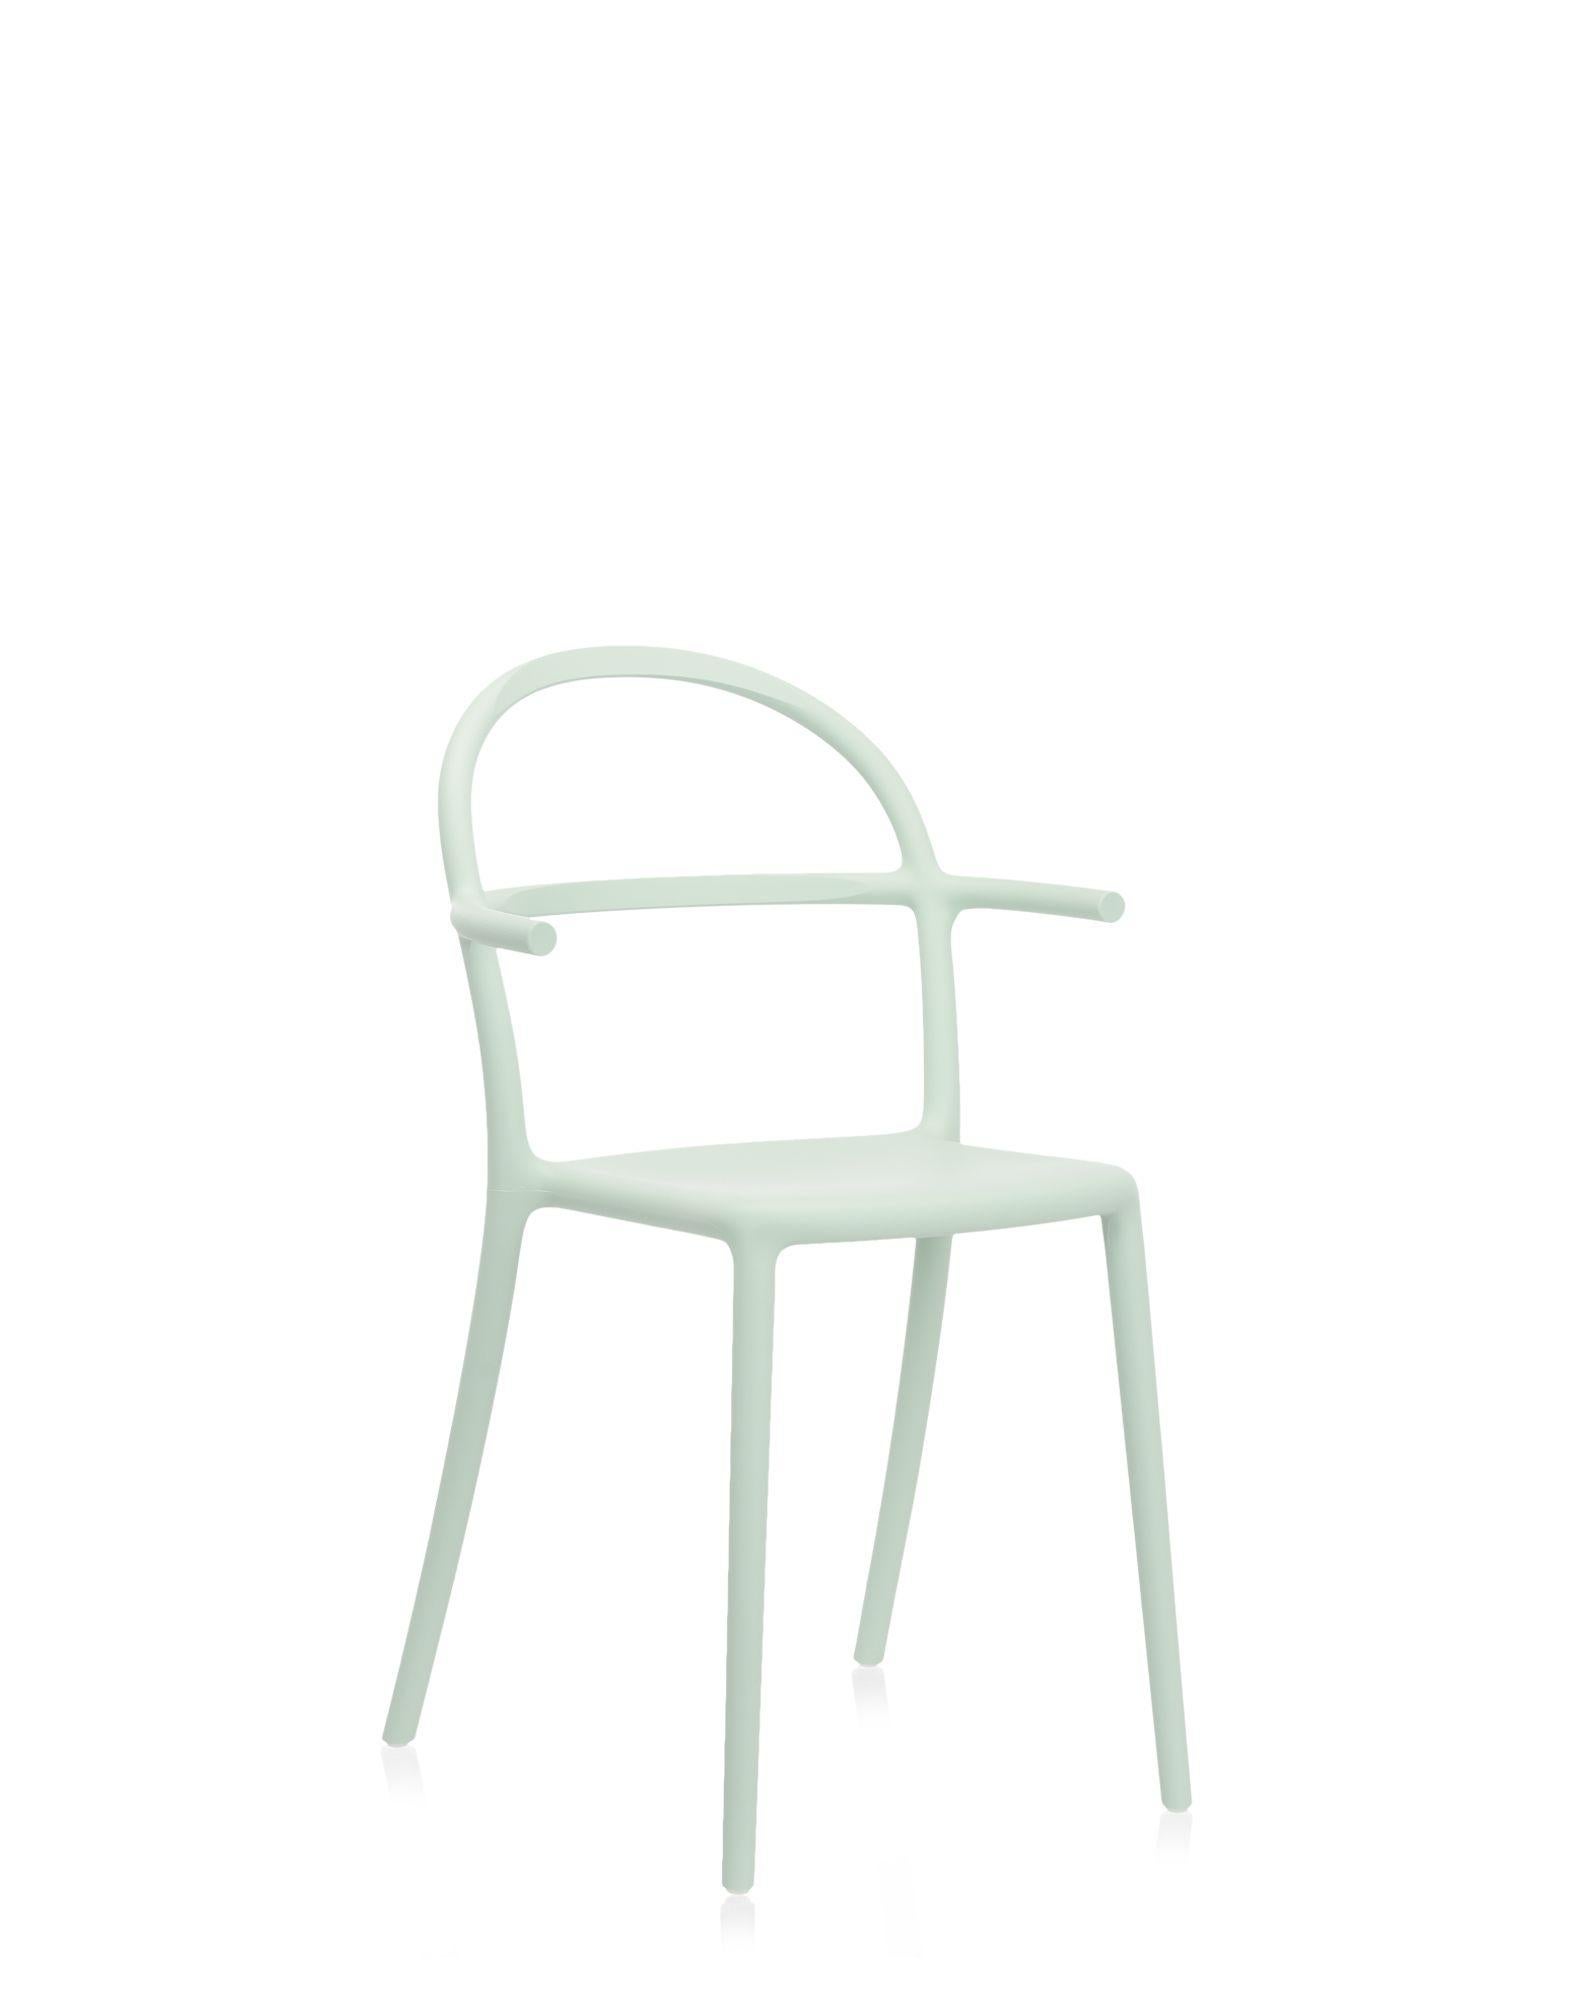 Generic is an ambitious project of deeply ethical connotations, in which new objectives are defined for contemporary design to fulfil and creativity is seen in the light of a public service. Thanks to a creative concept by Philippe Starck, Kartell